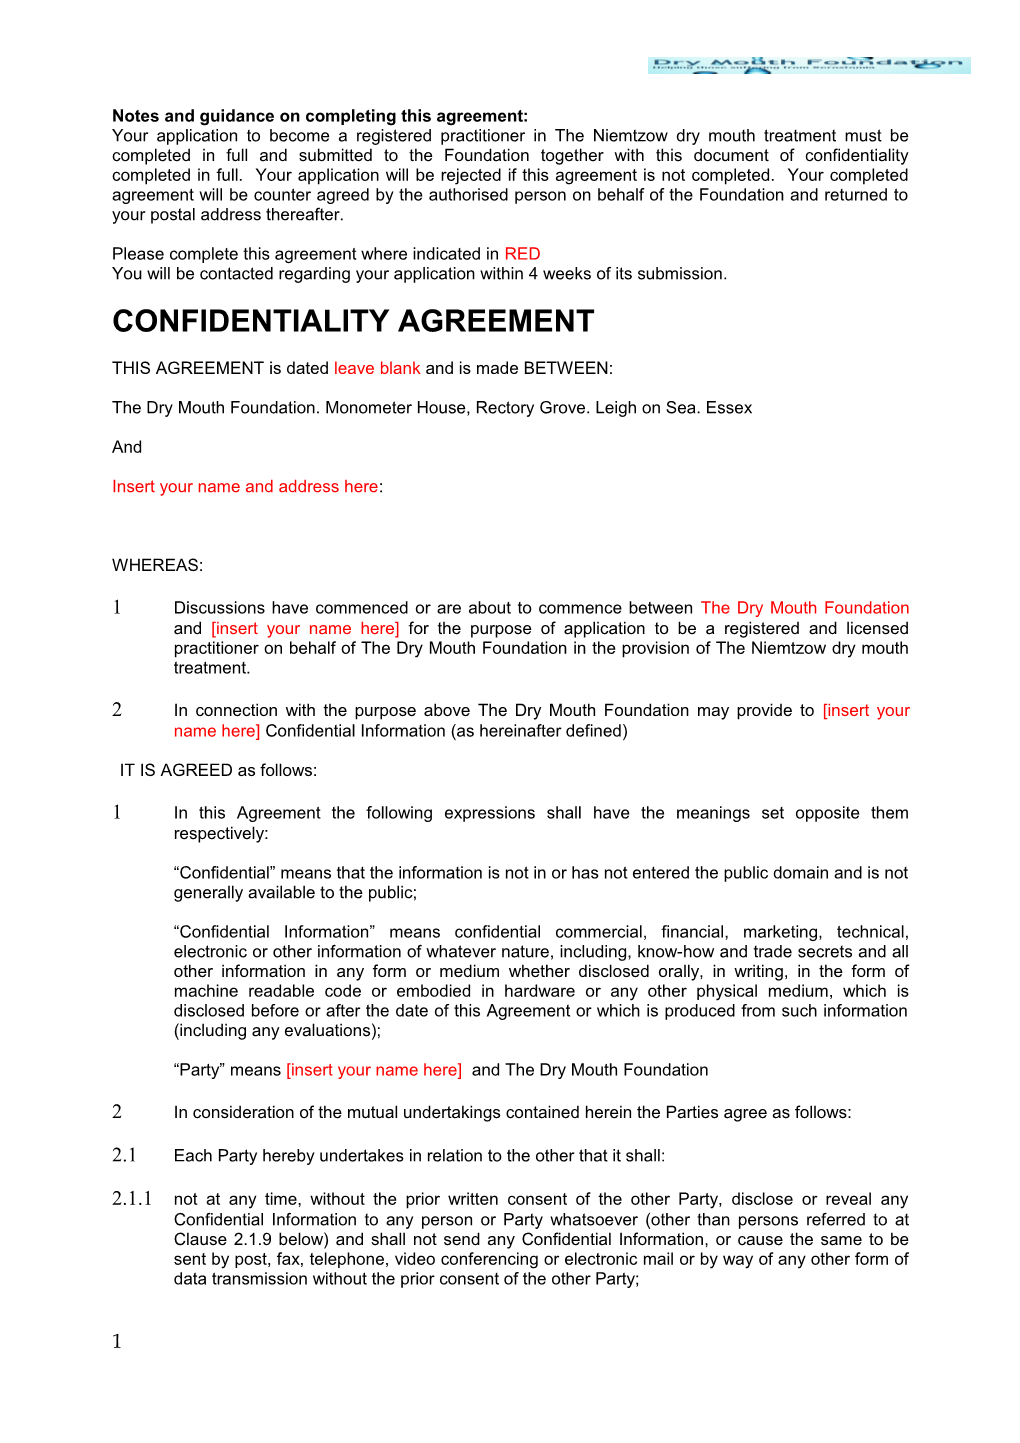 Notes and Guidance on Completing This Agreement